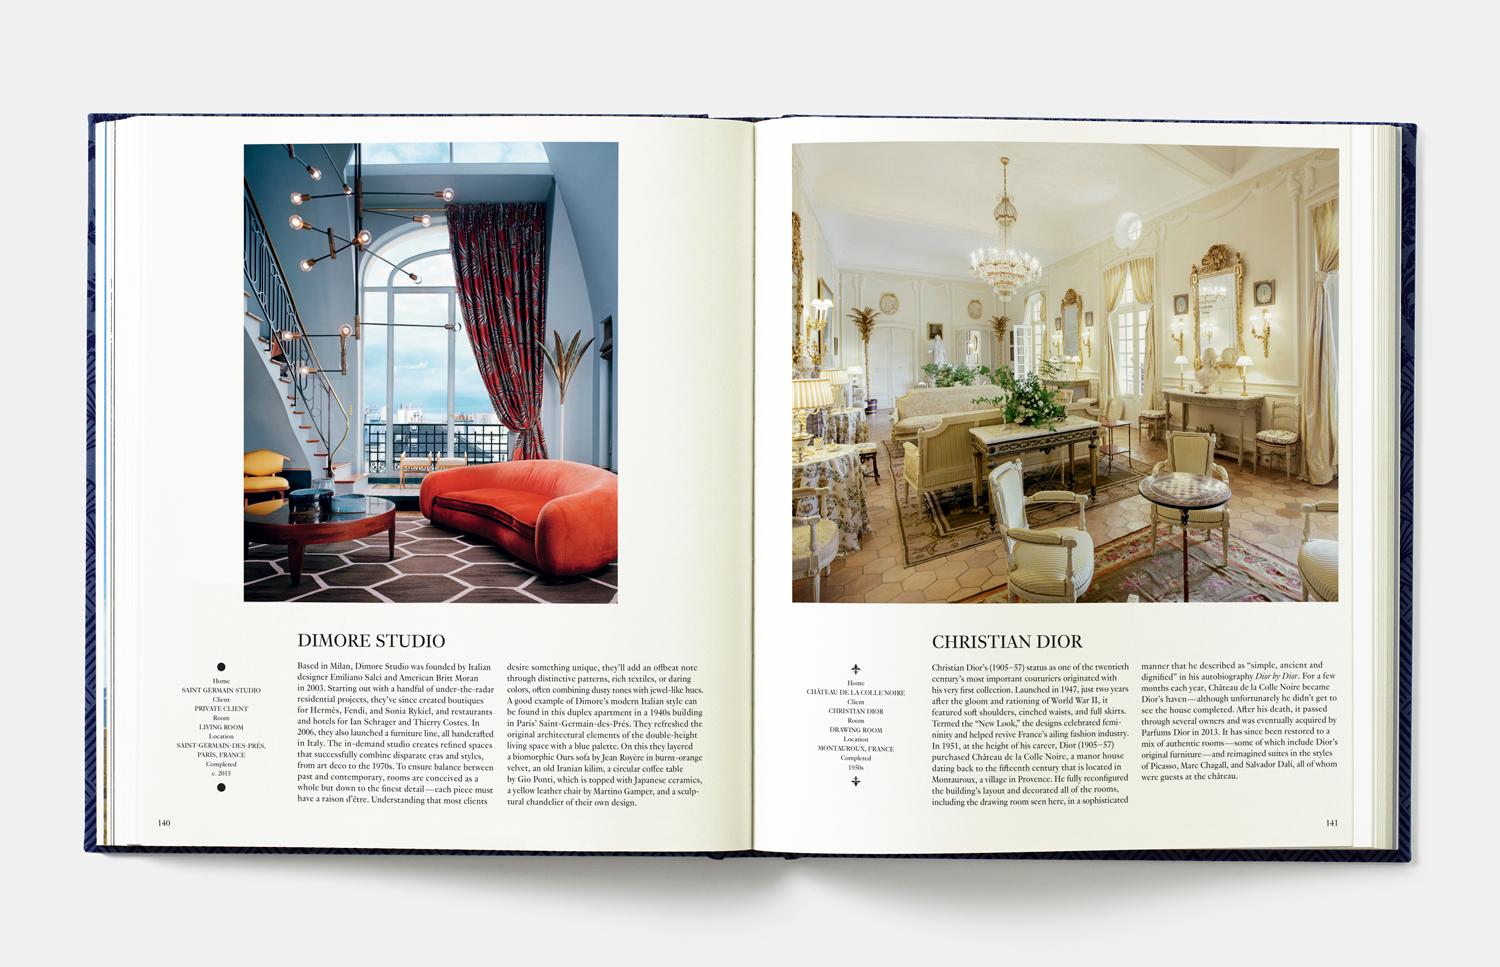 More than 400 of the world’s best living spaces created by over 300 of the most influential people in interior design in one luxurious book

Oversized and available in four collectable velvet covers to decorate any space in style, Interiors: The